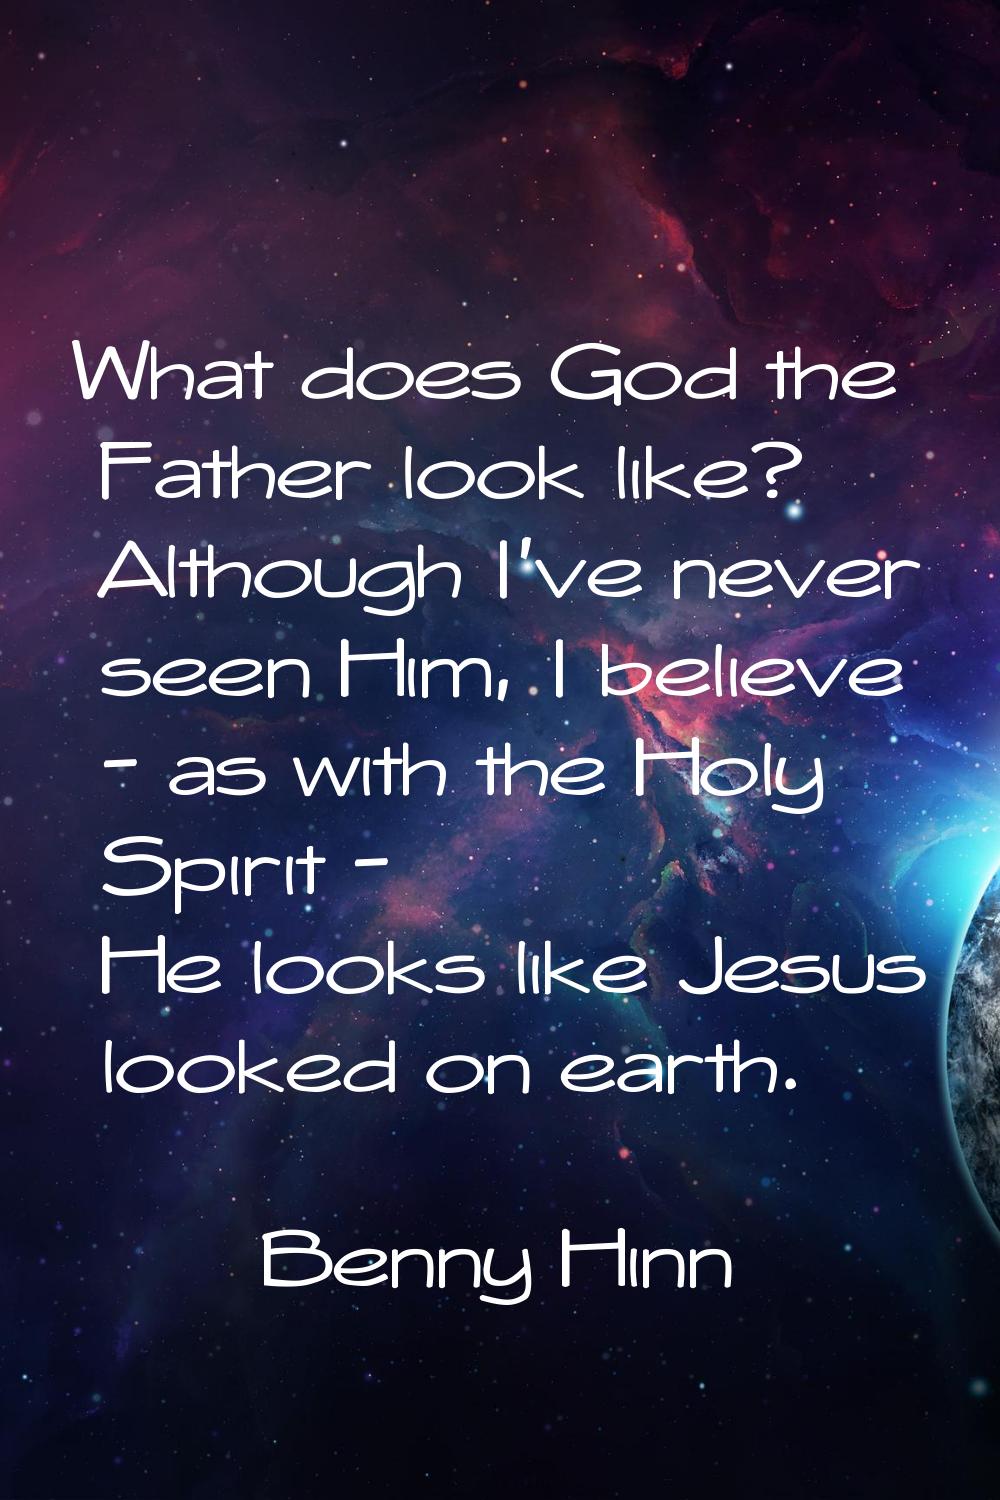 What does God the Father look like? Although I've never seen Him, I believe - as with the Holy Spir